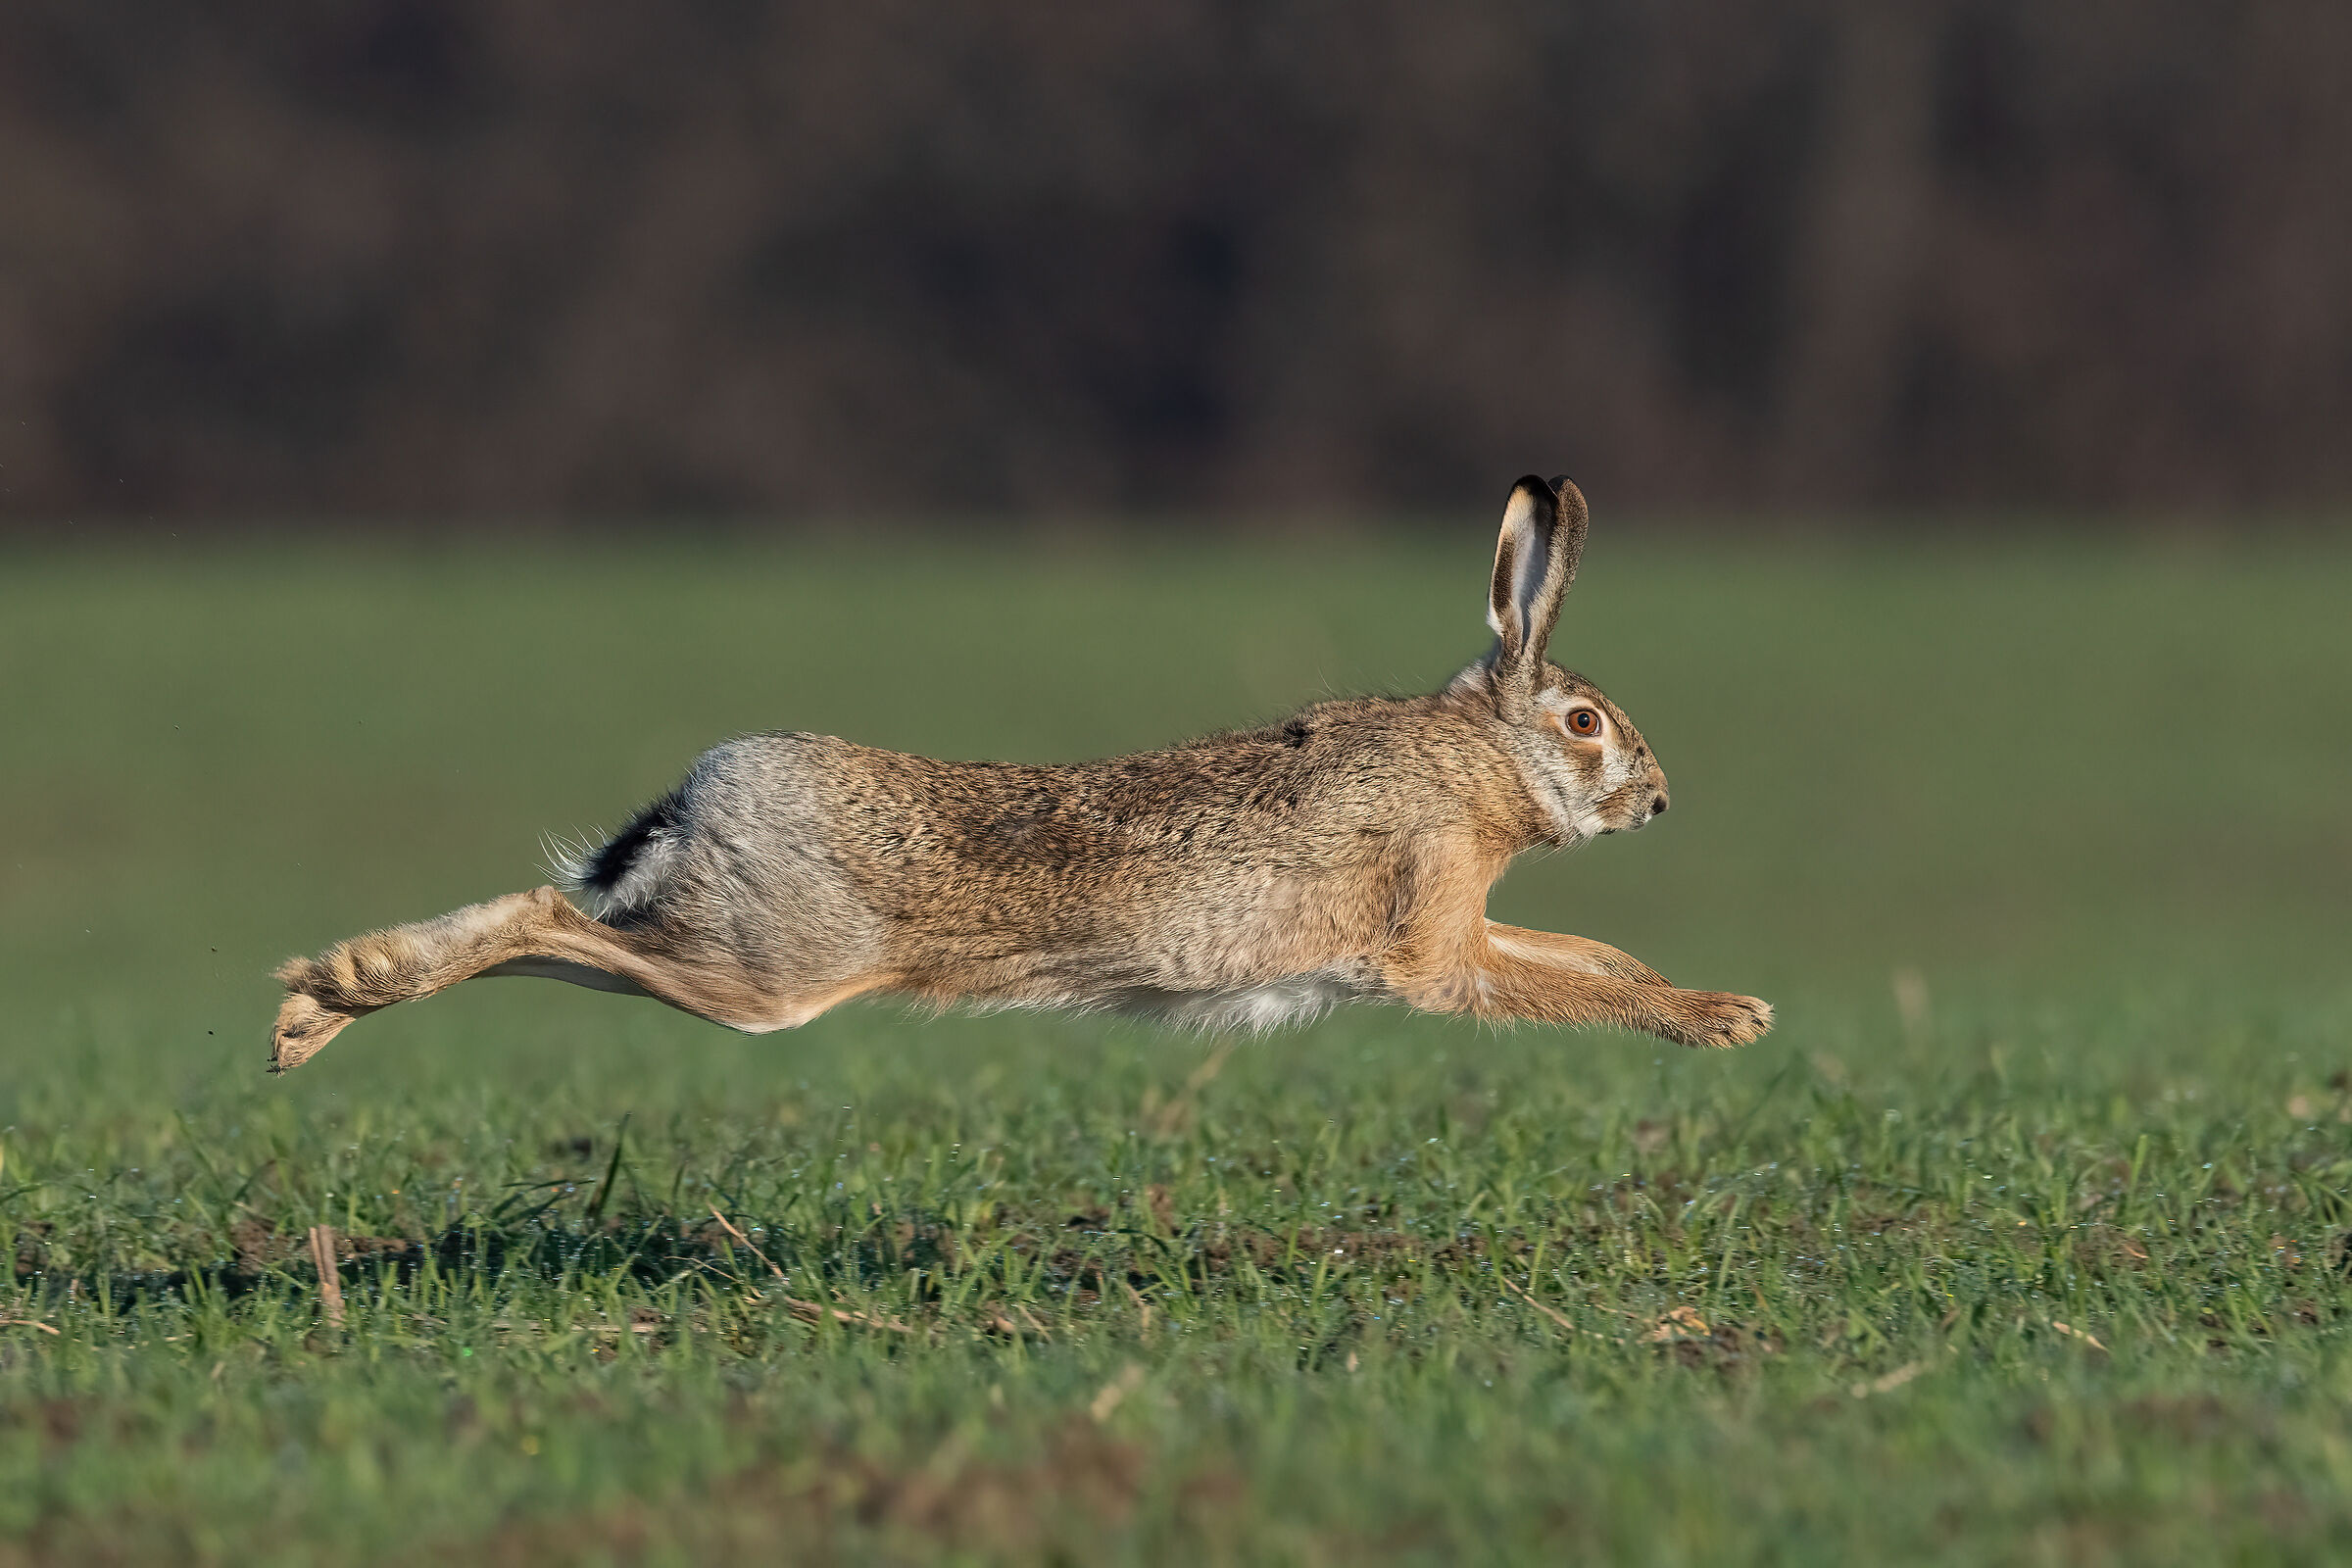 Hare launched in full swing...